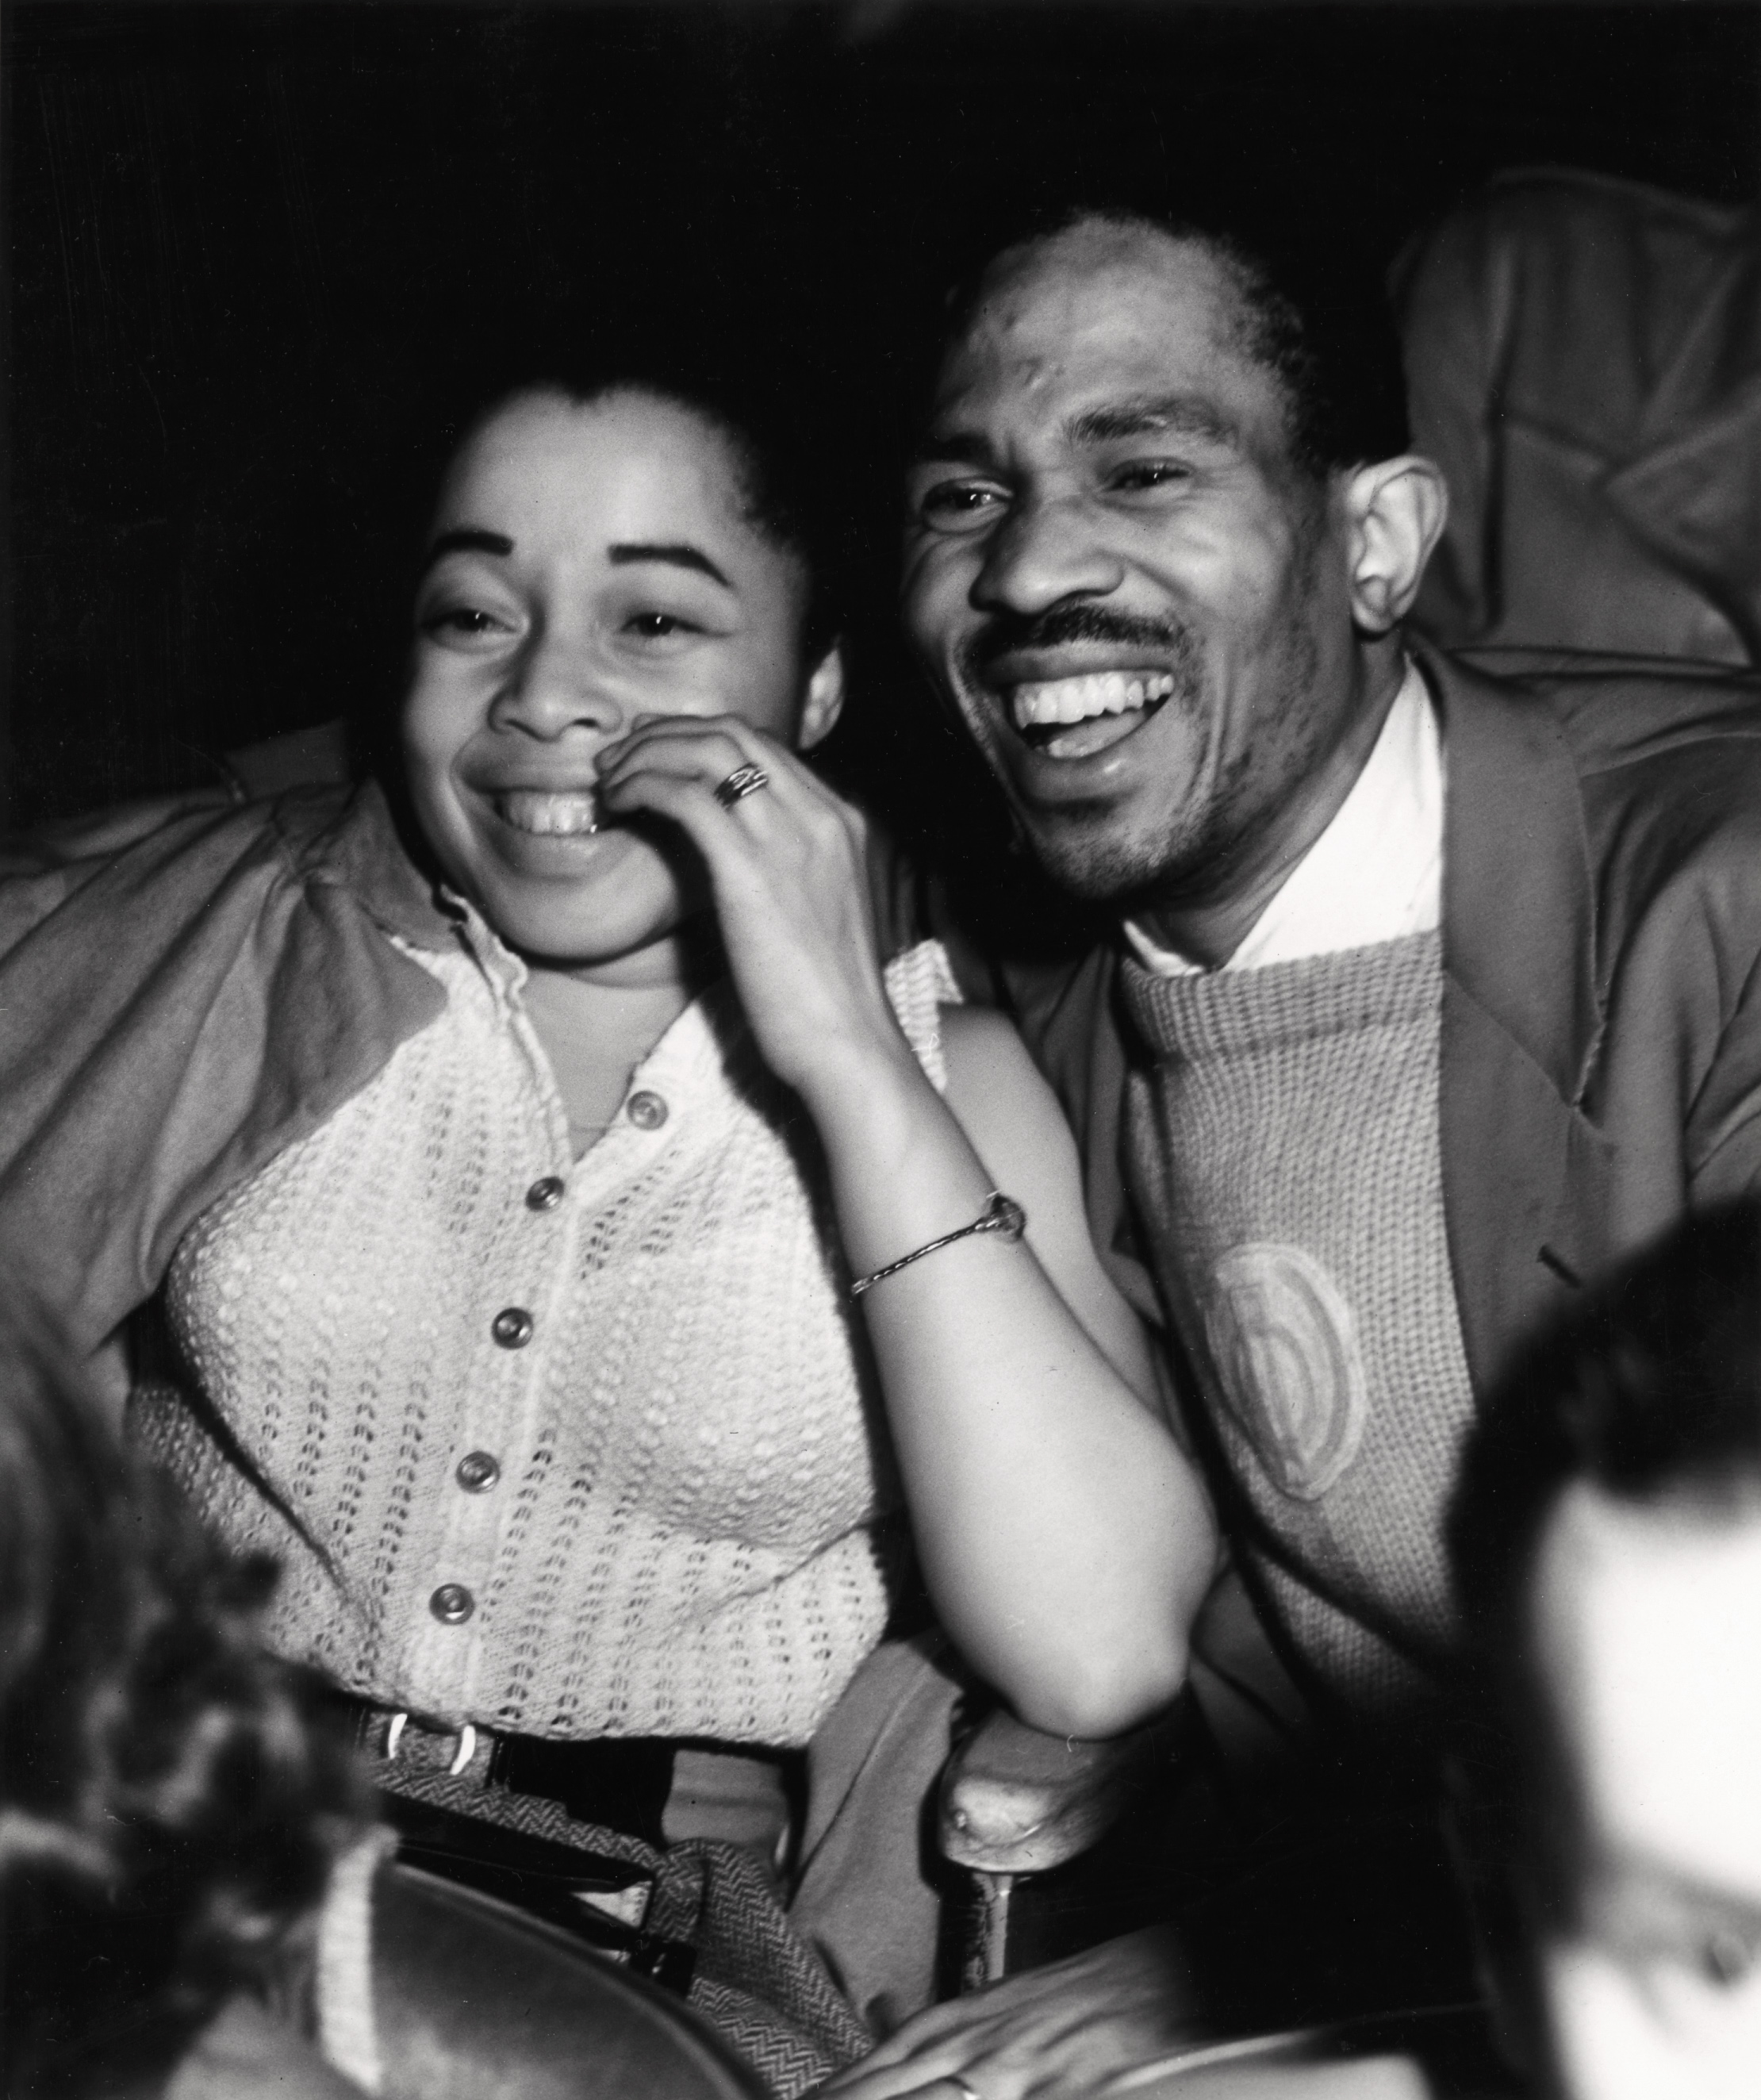 GIGGLES: Woman and man laughing  © Weegee/ International Center of Photography.